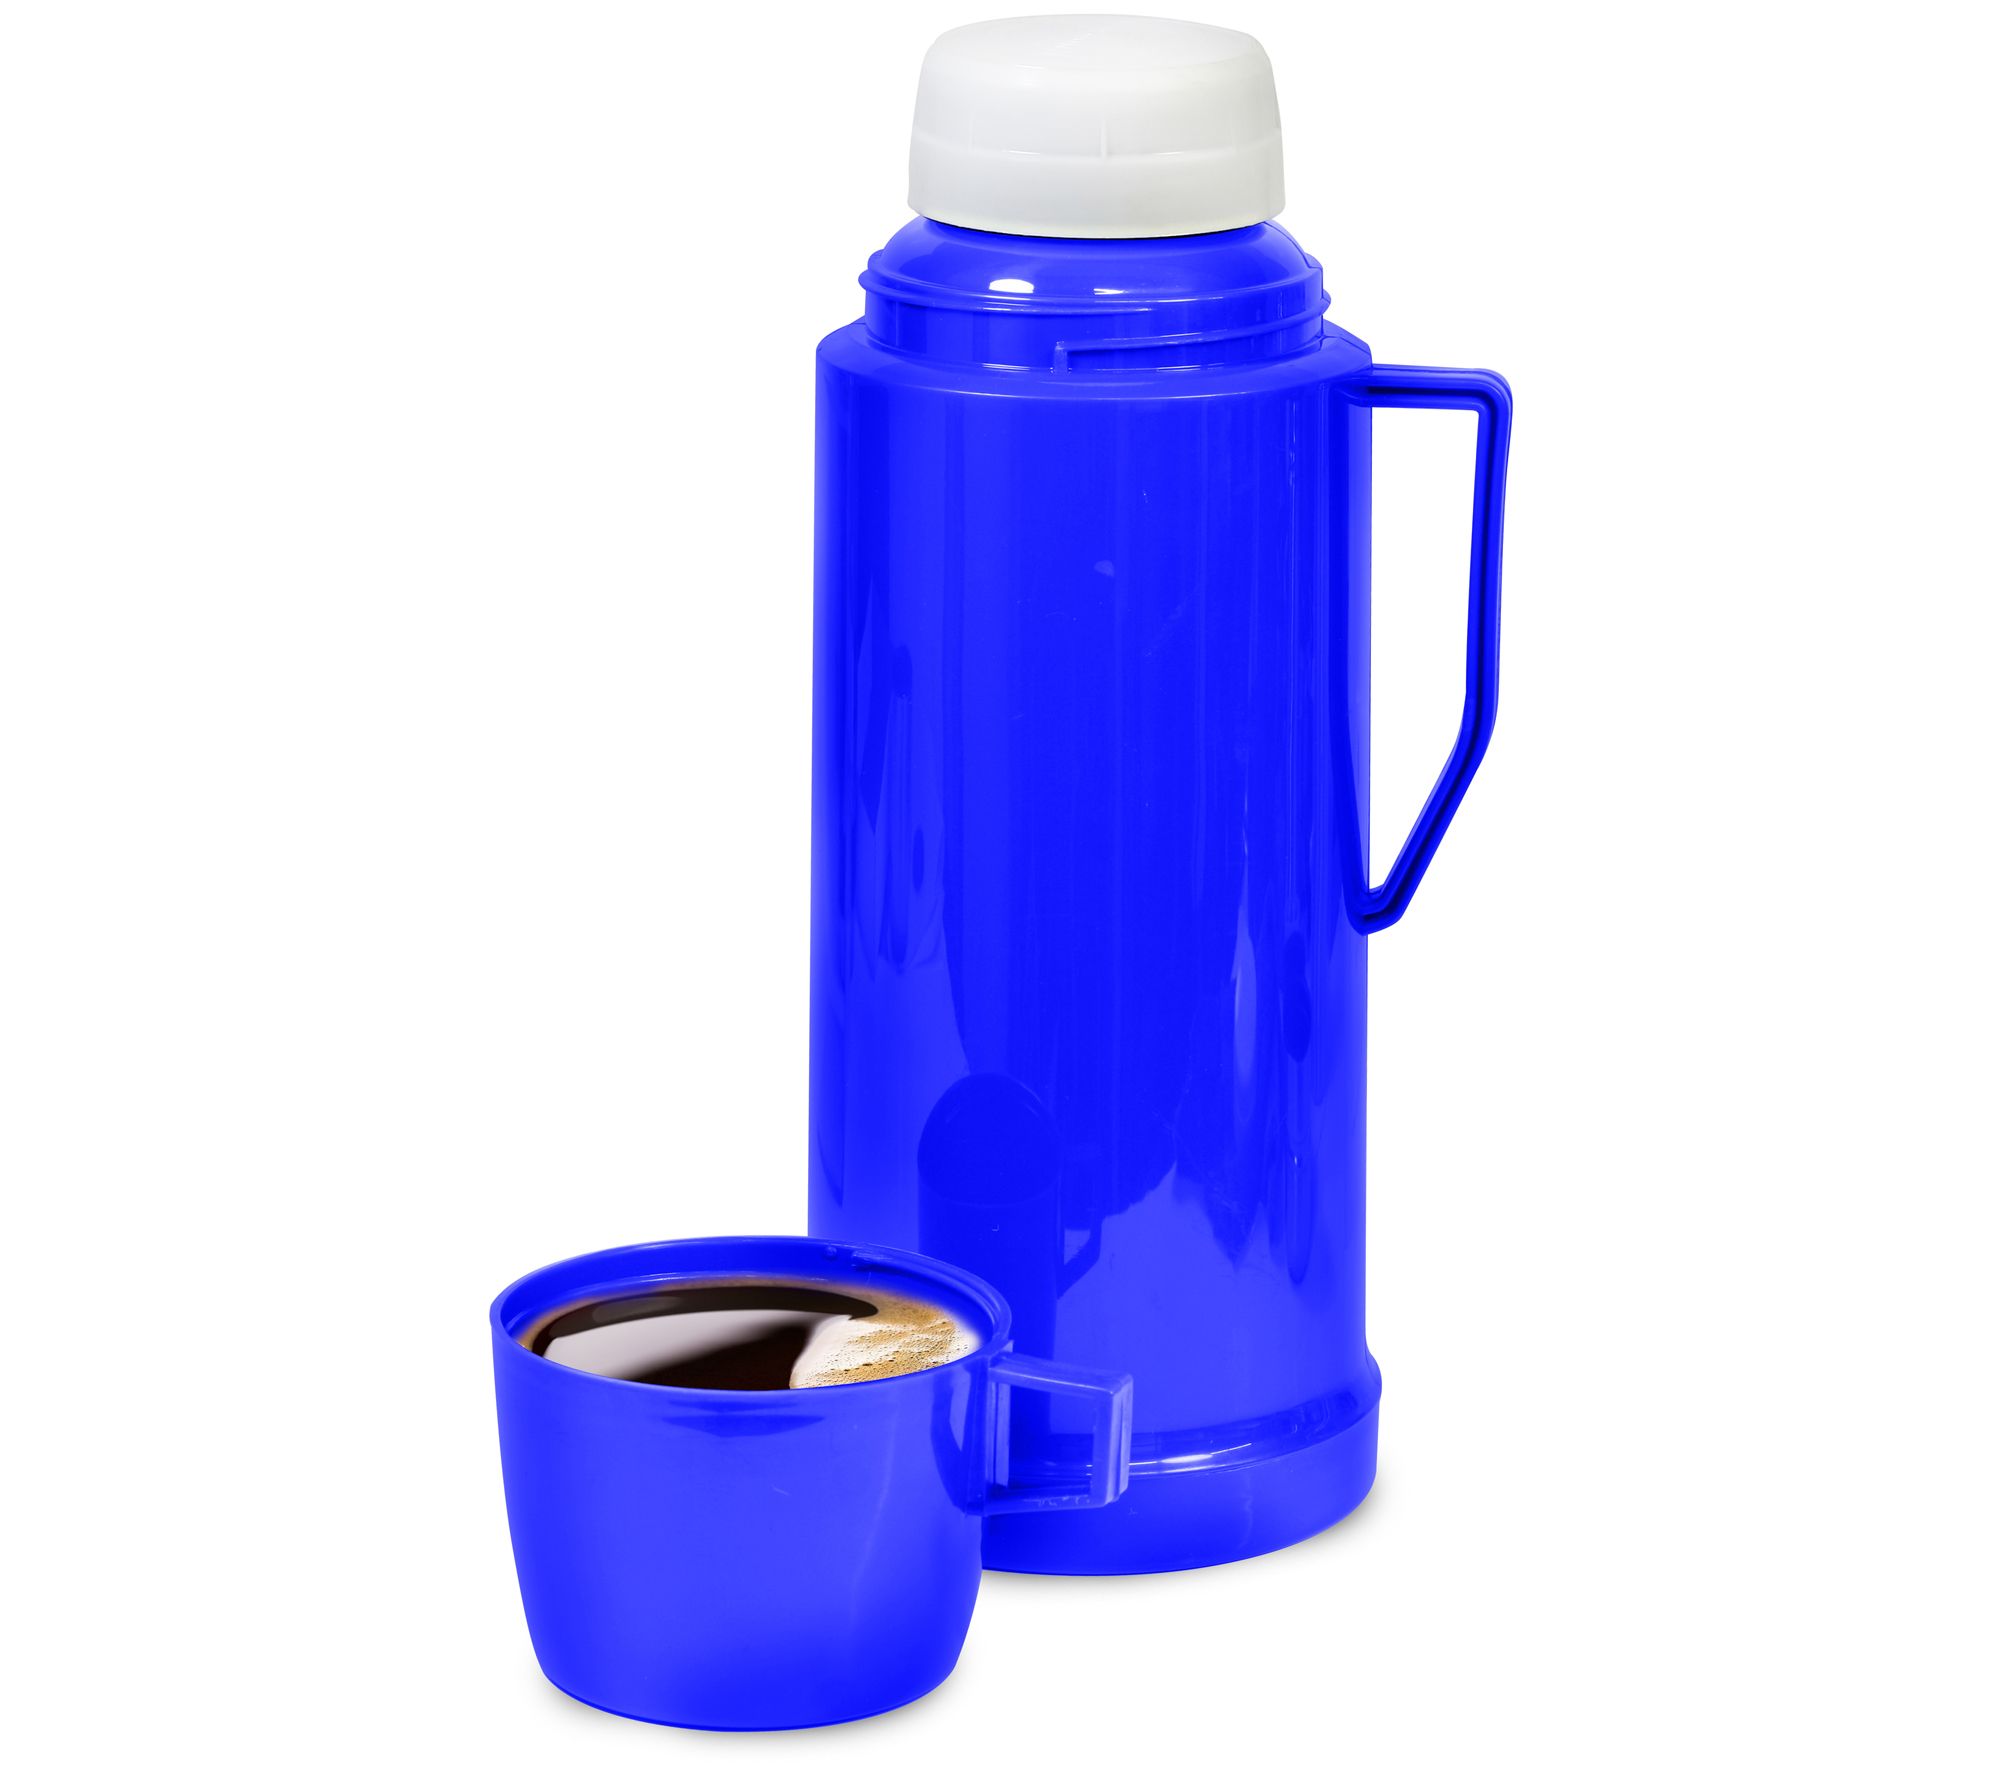 Bene Casa 8-oz Double-Walled Insulated Thermos 